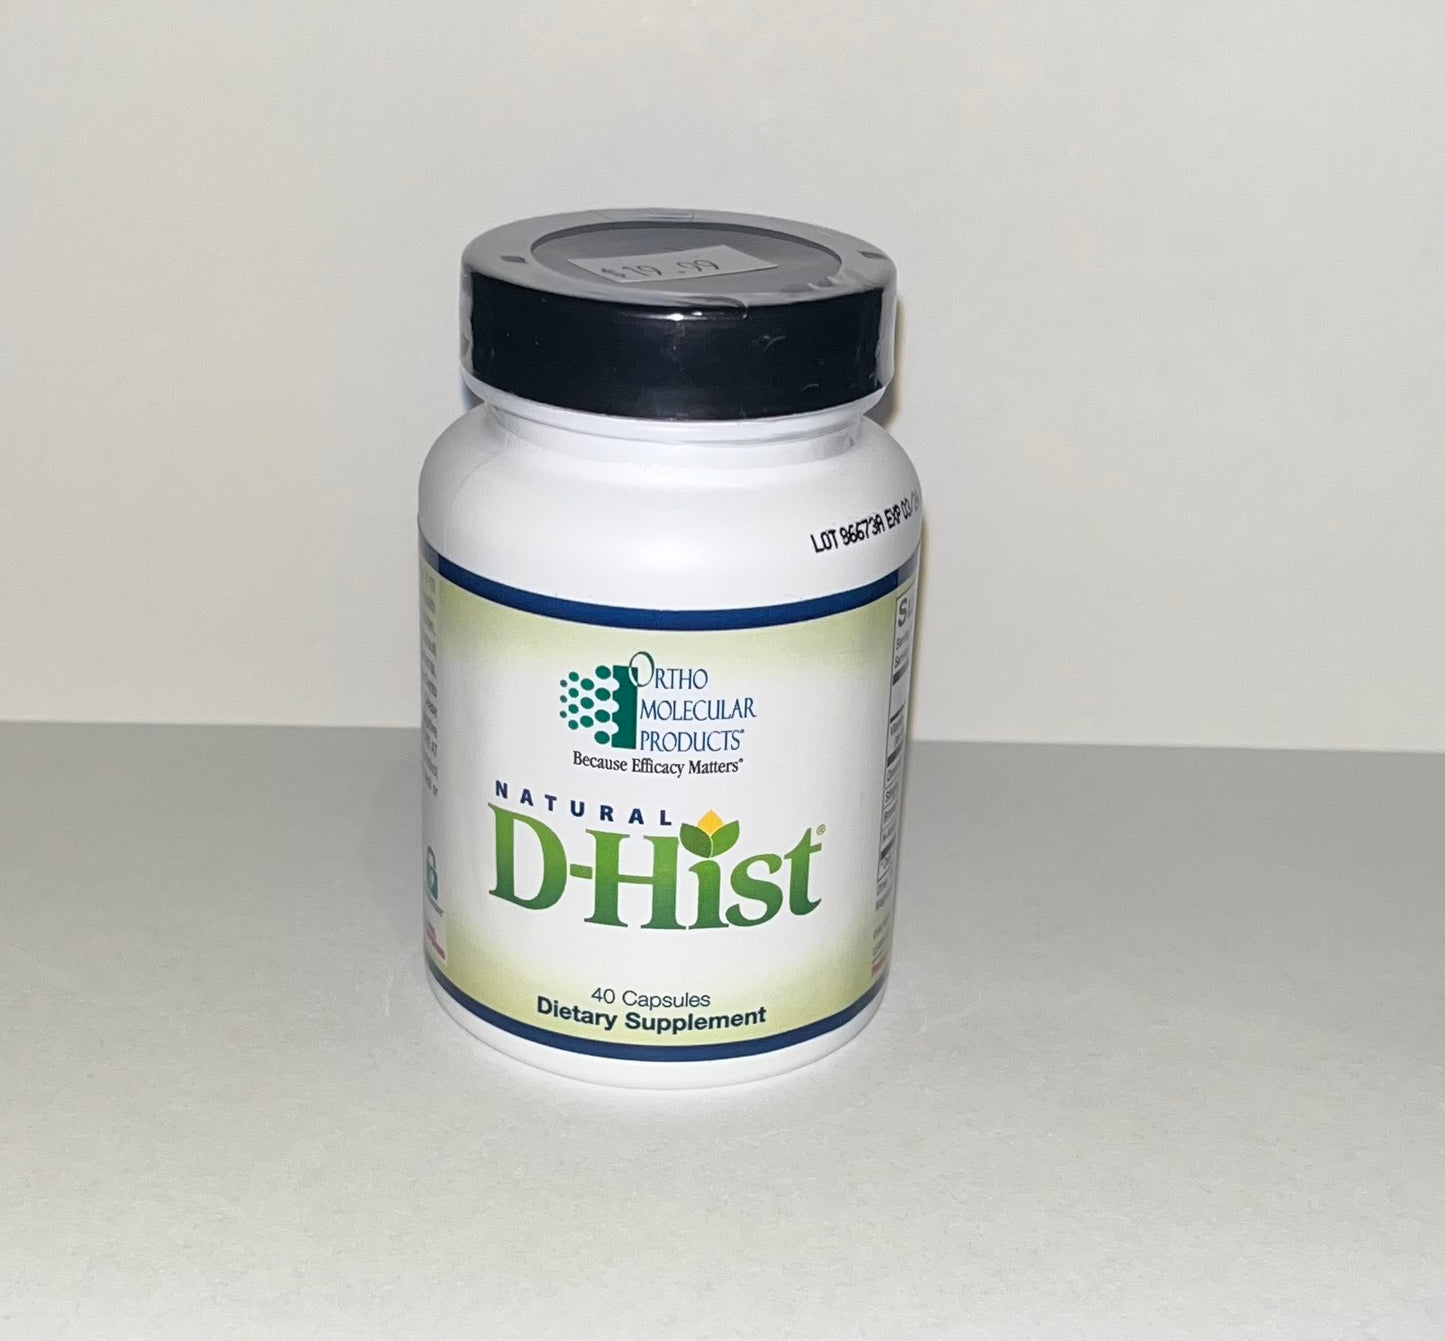 Natural DHist Dietary Supplement